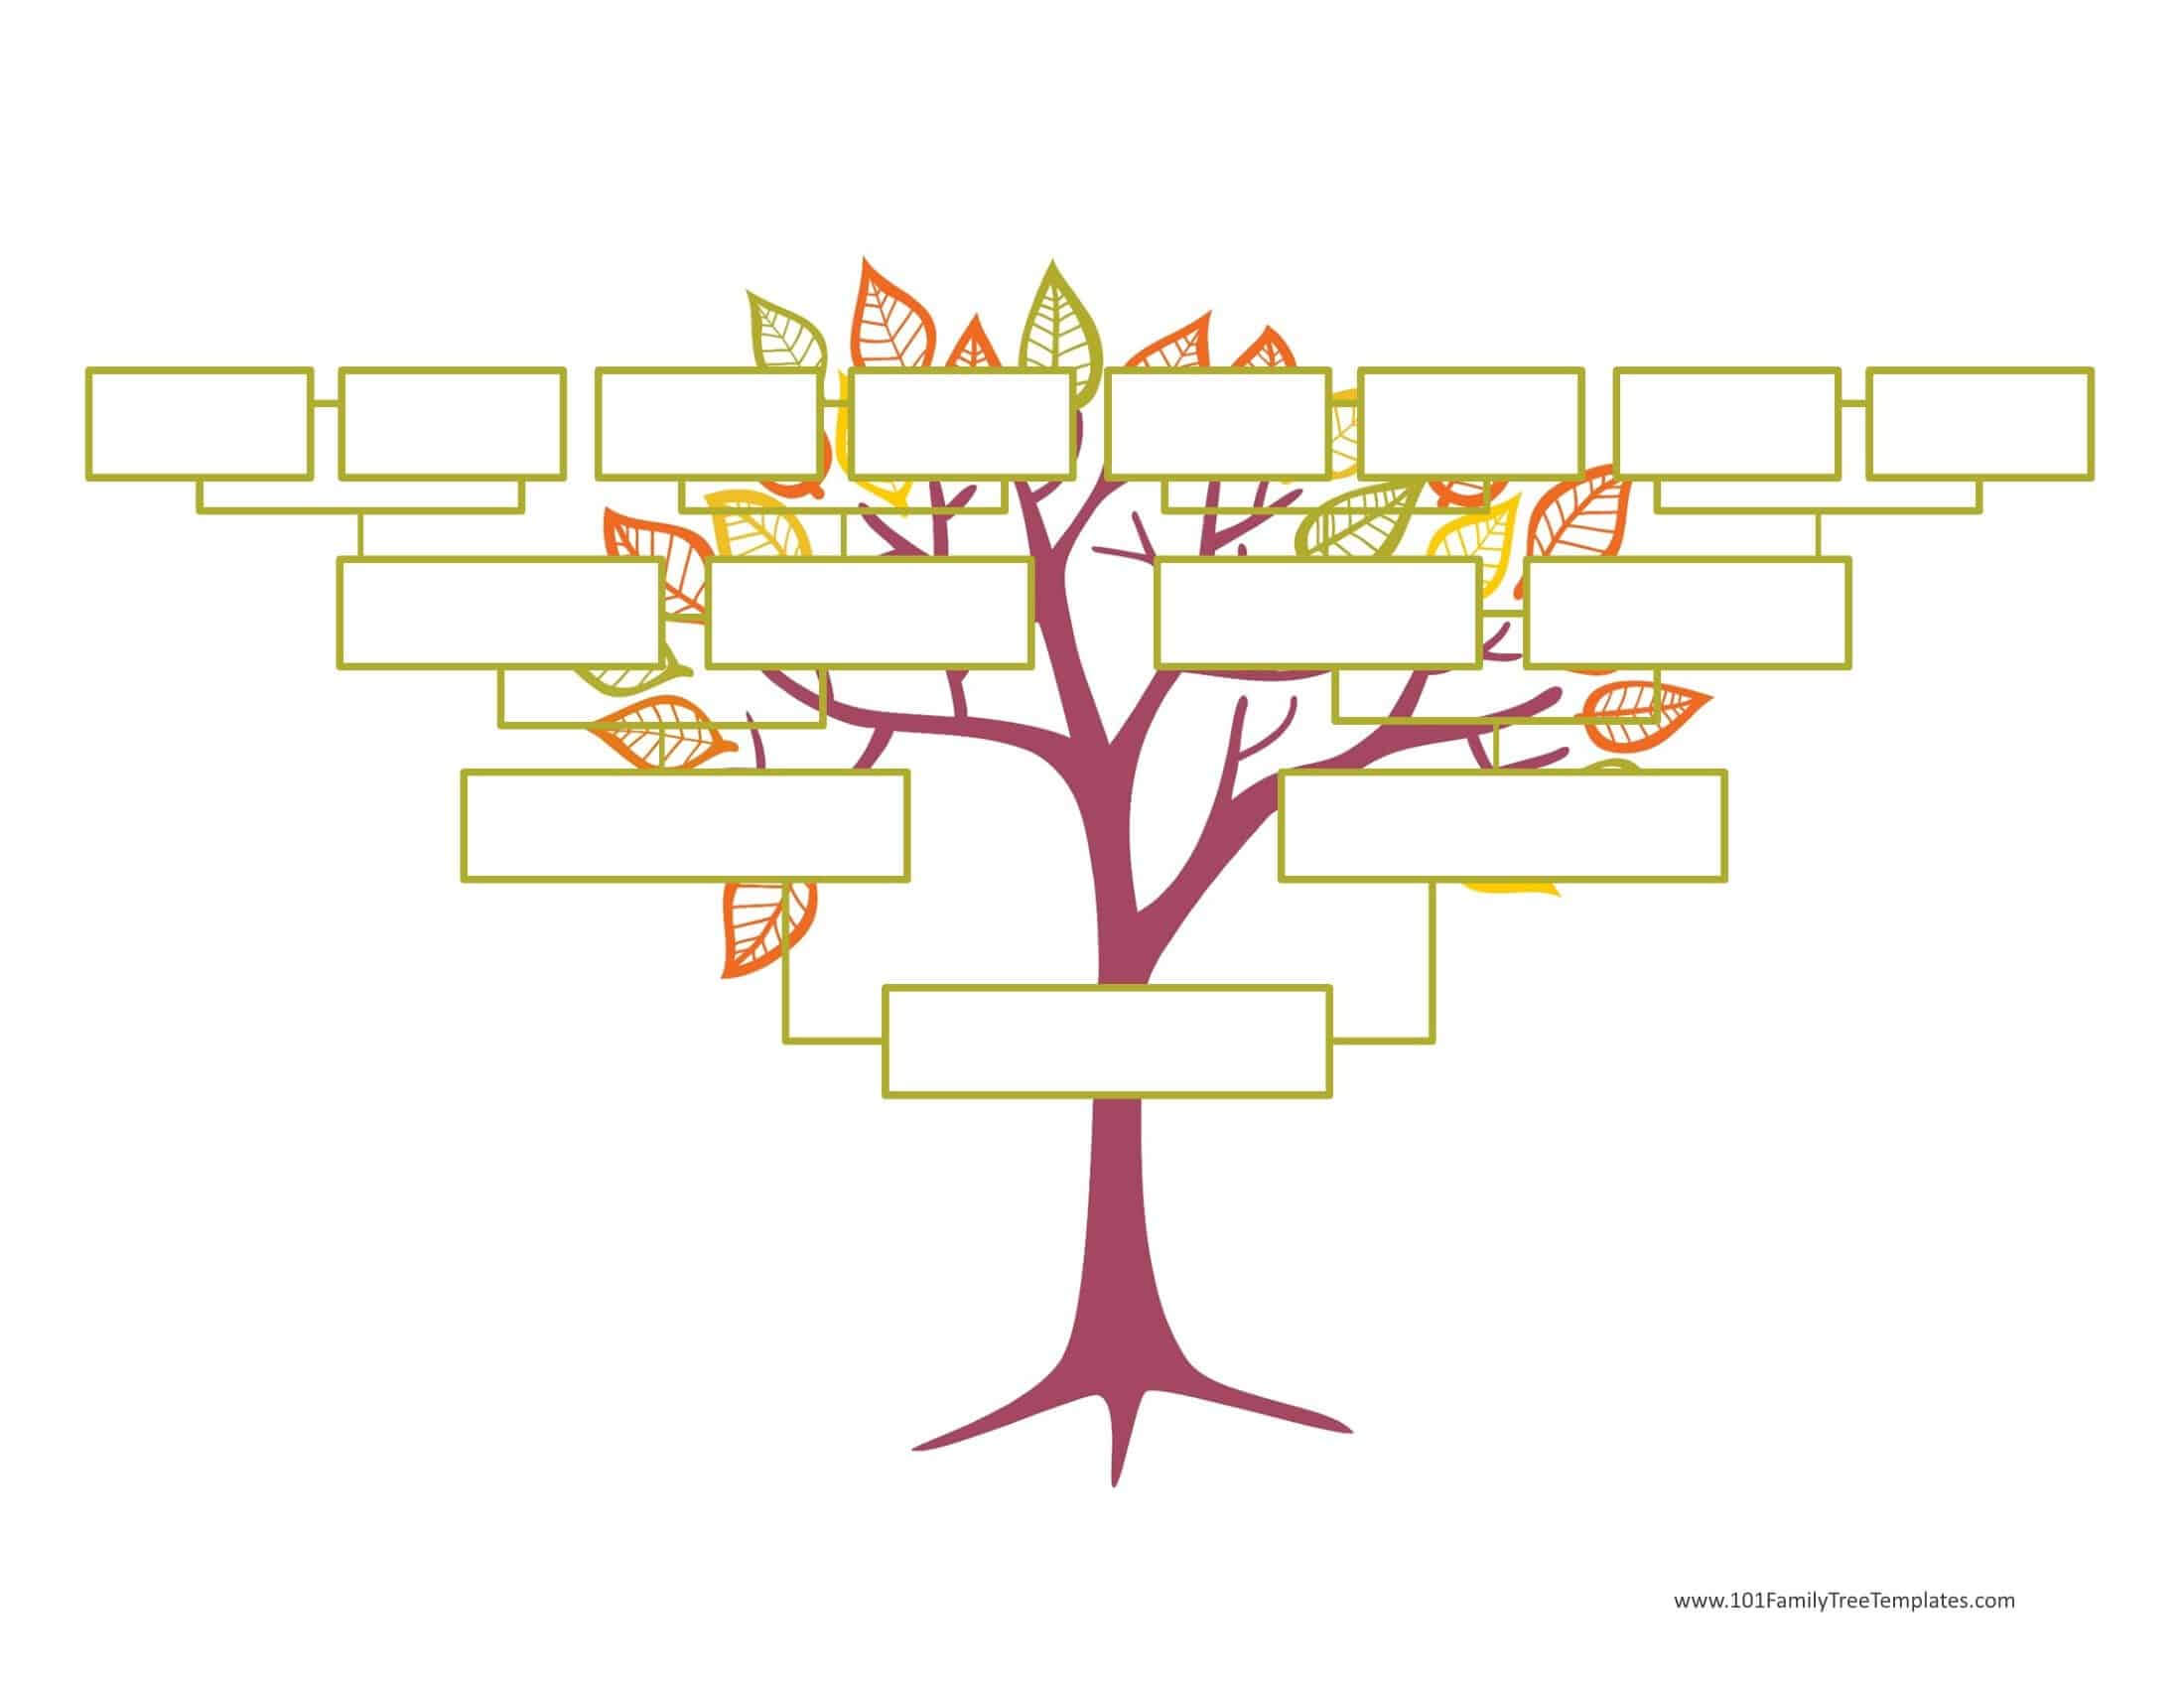 Blank Family Tree Template | Free Instant Download With Blank Tree Diagram Template